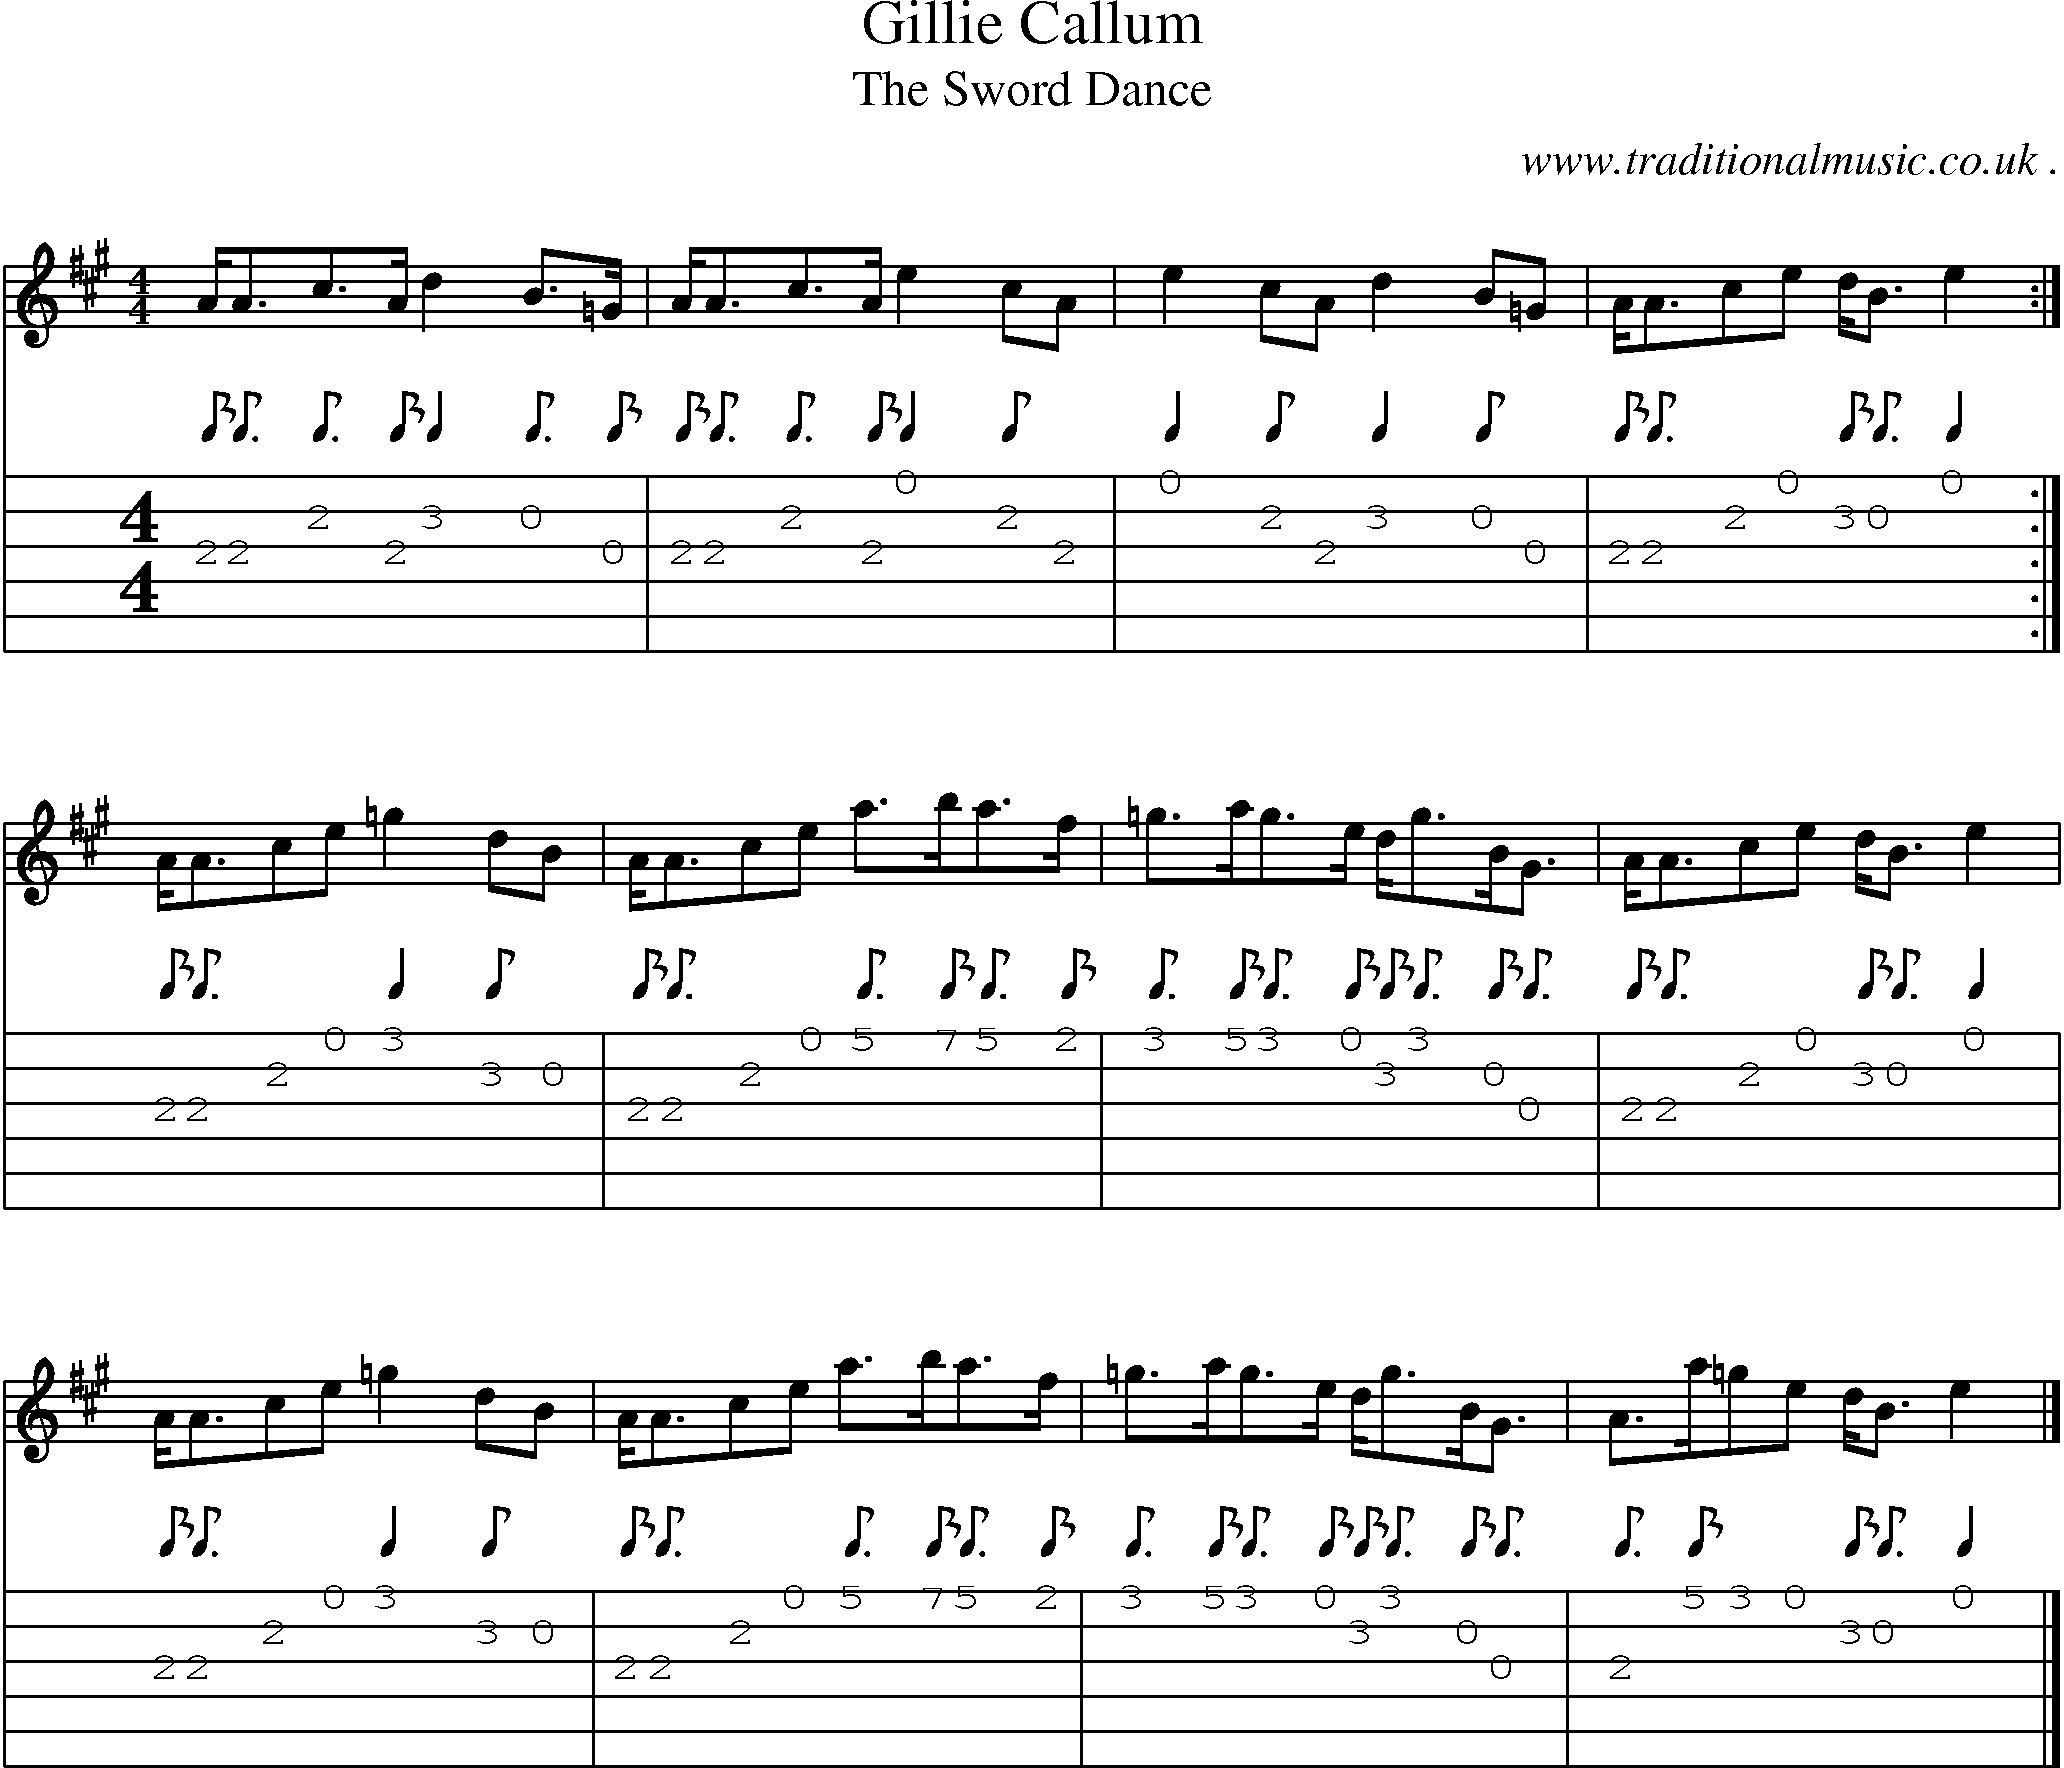 Sheet-music  score, Chords and Guitar Tabs for Gillie Callum